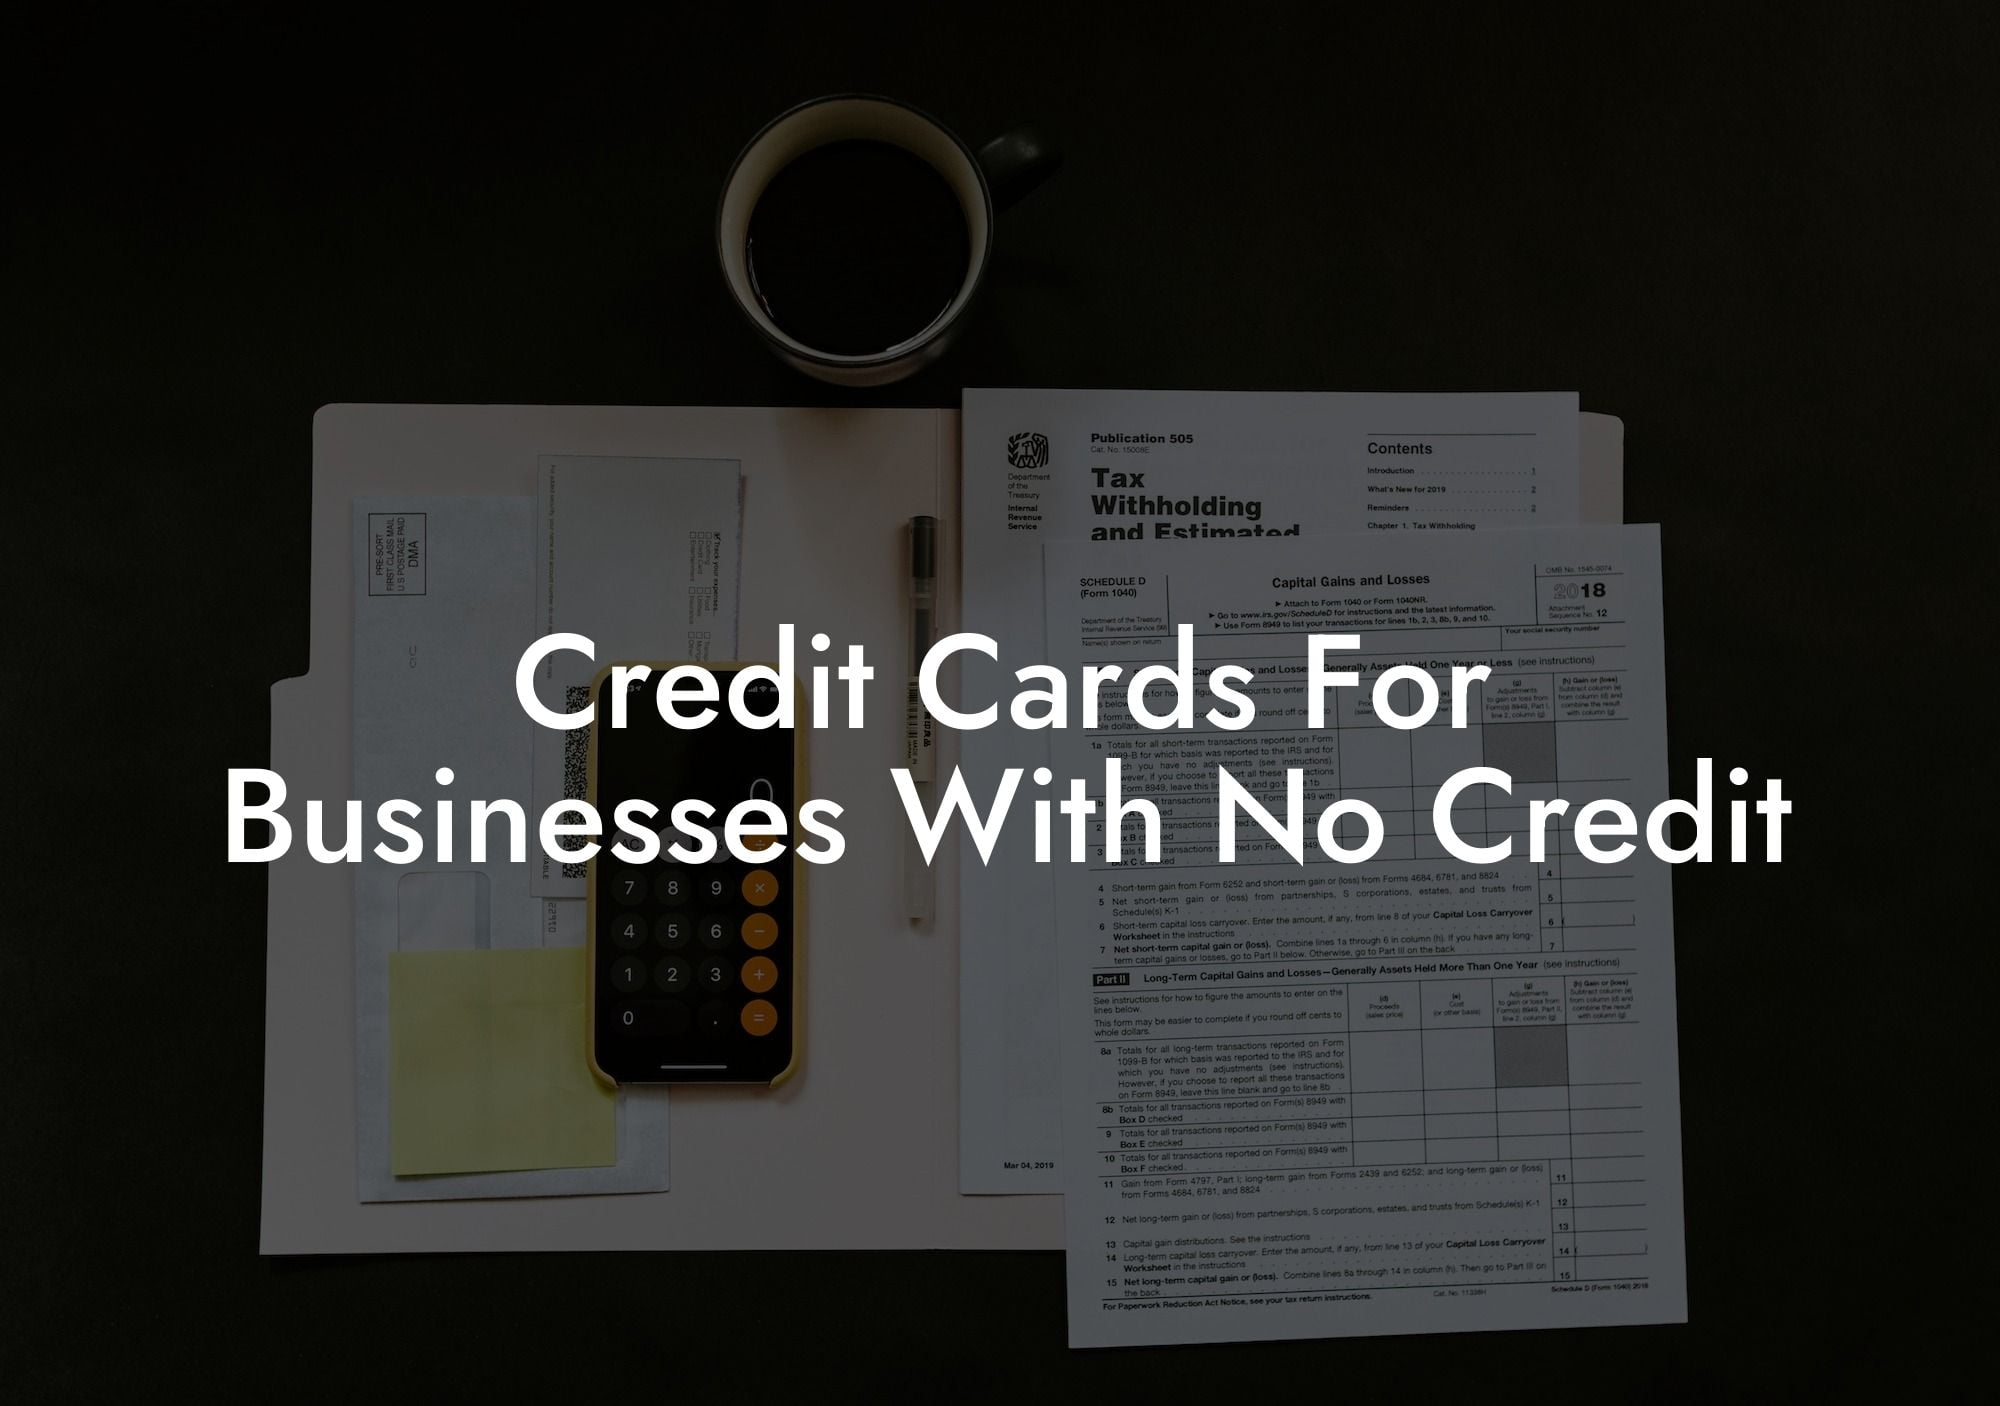 Credit Cards For Businesses With No Credit